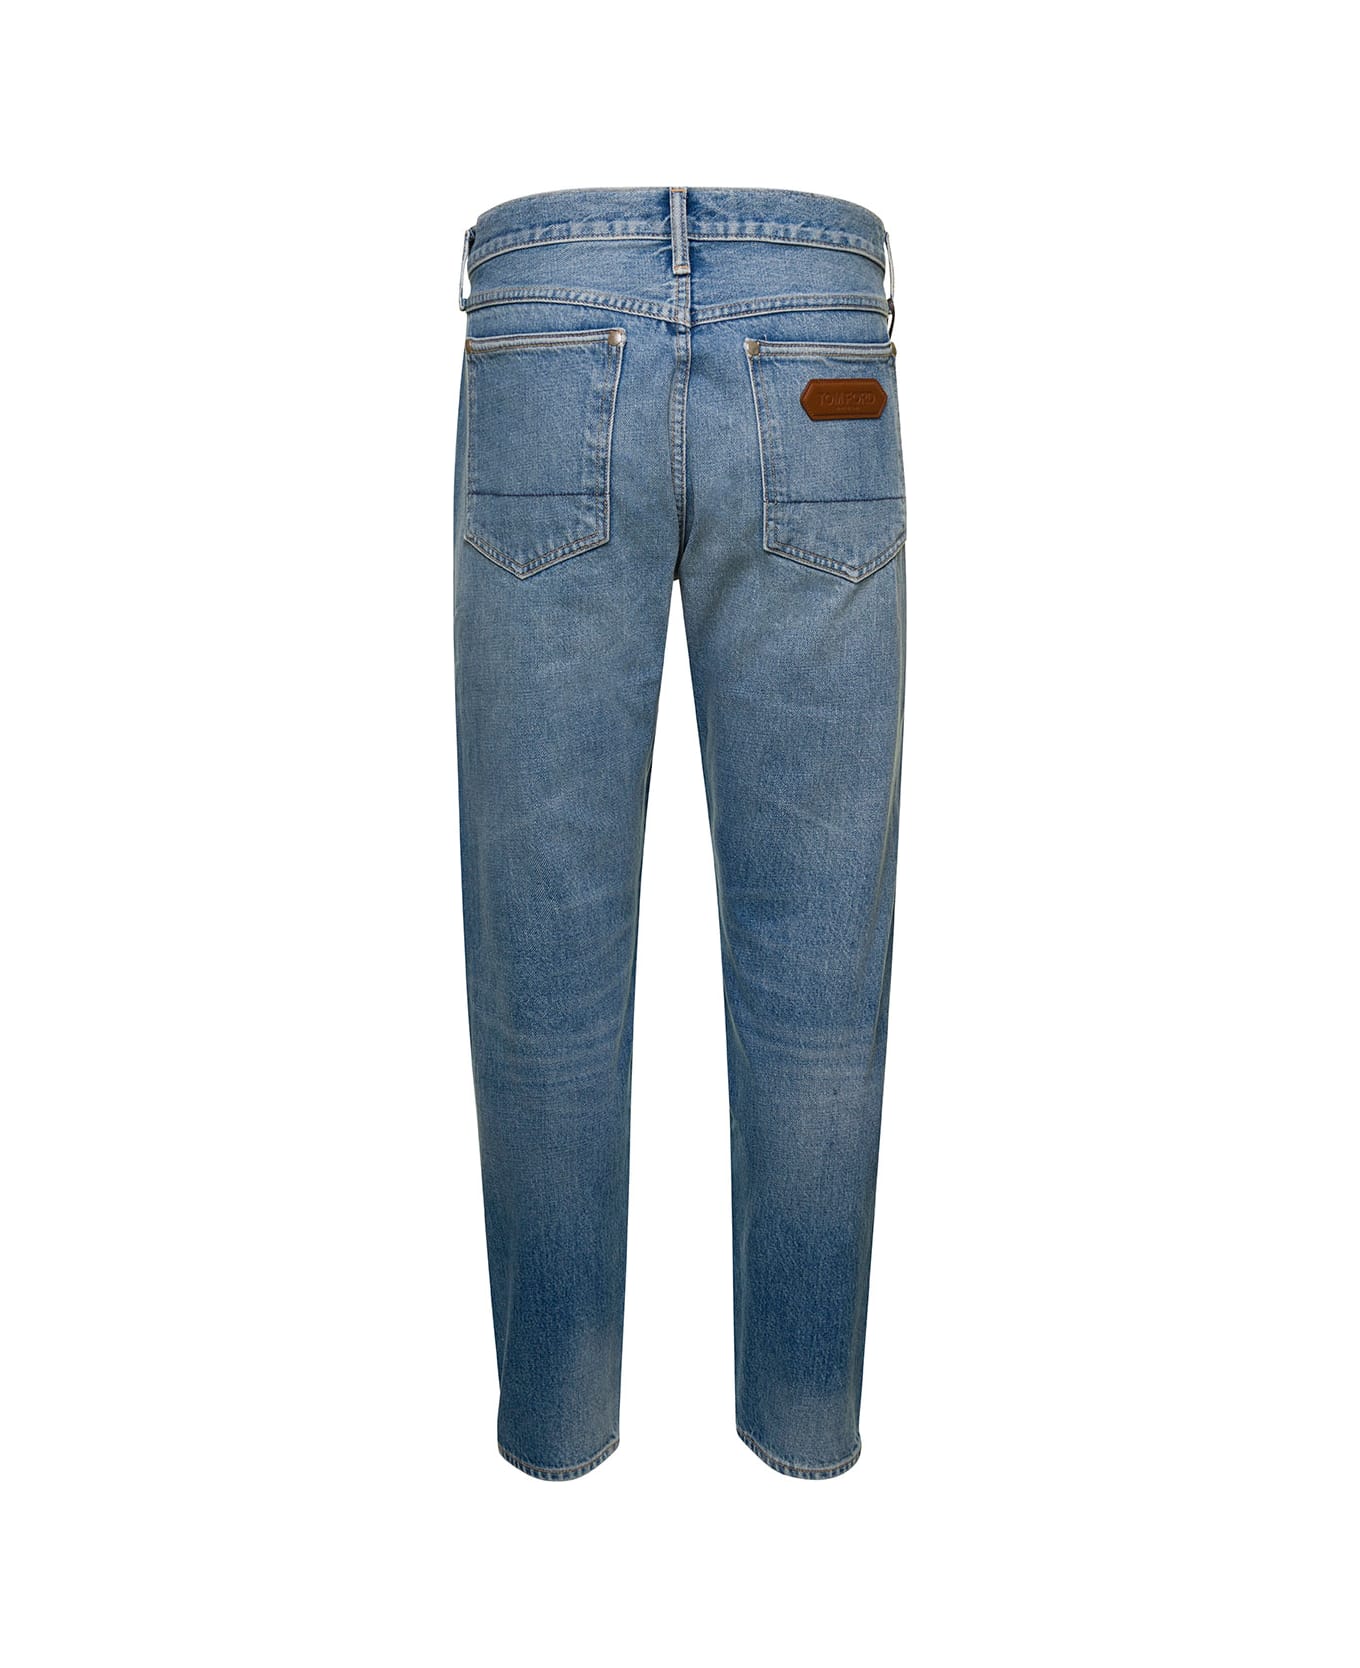 Tom Ford Light Blue 5-pocket Style Jeans With Rips And Logo Patch In Cotton Denim Man - Blu